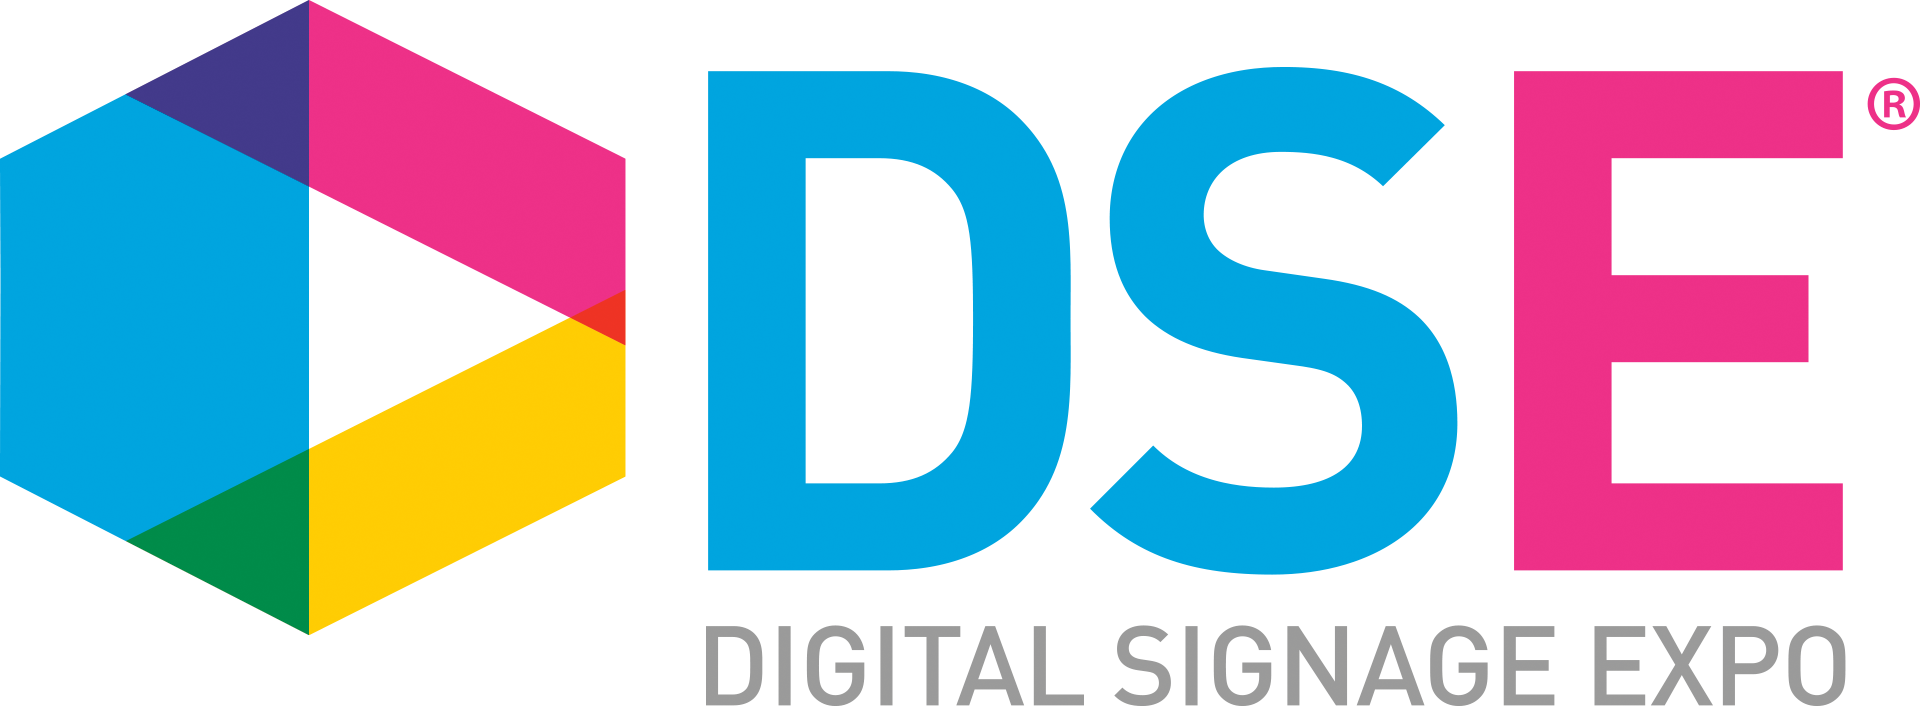 5 Things We're Looking Forward to at DSE 2019